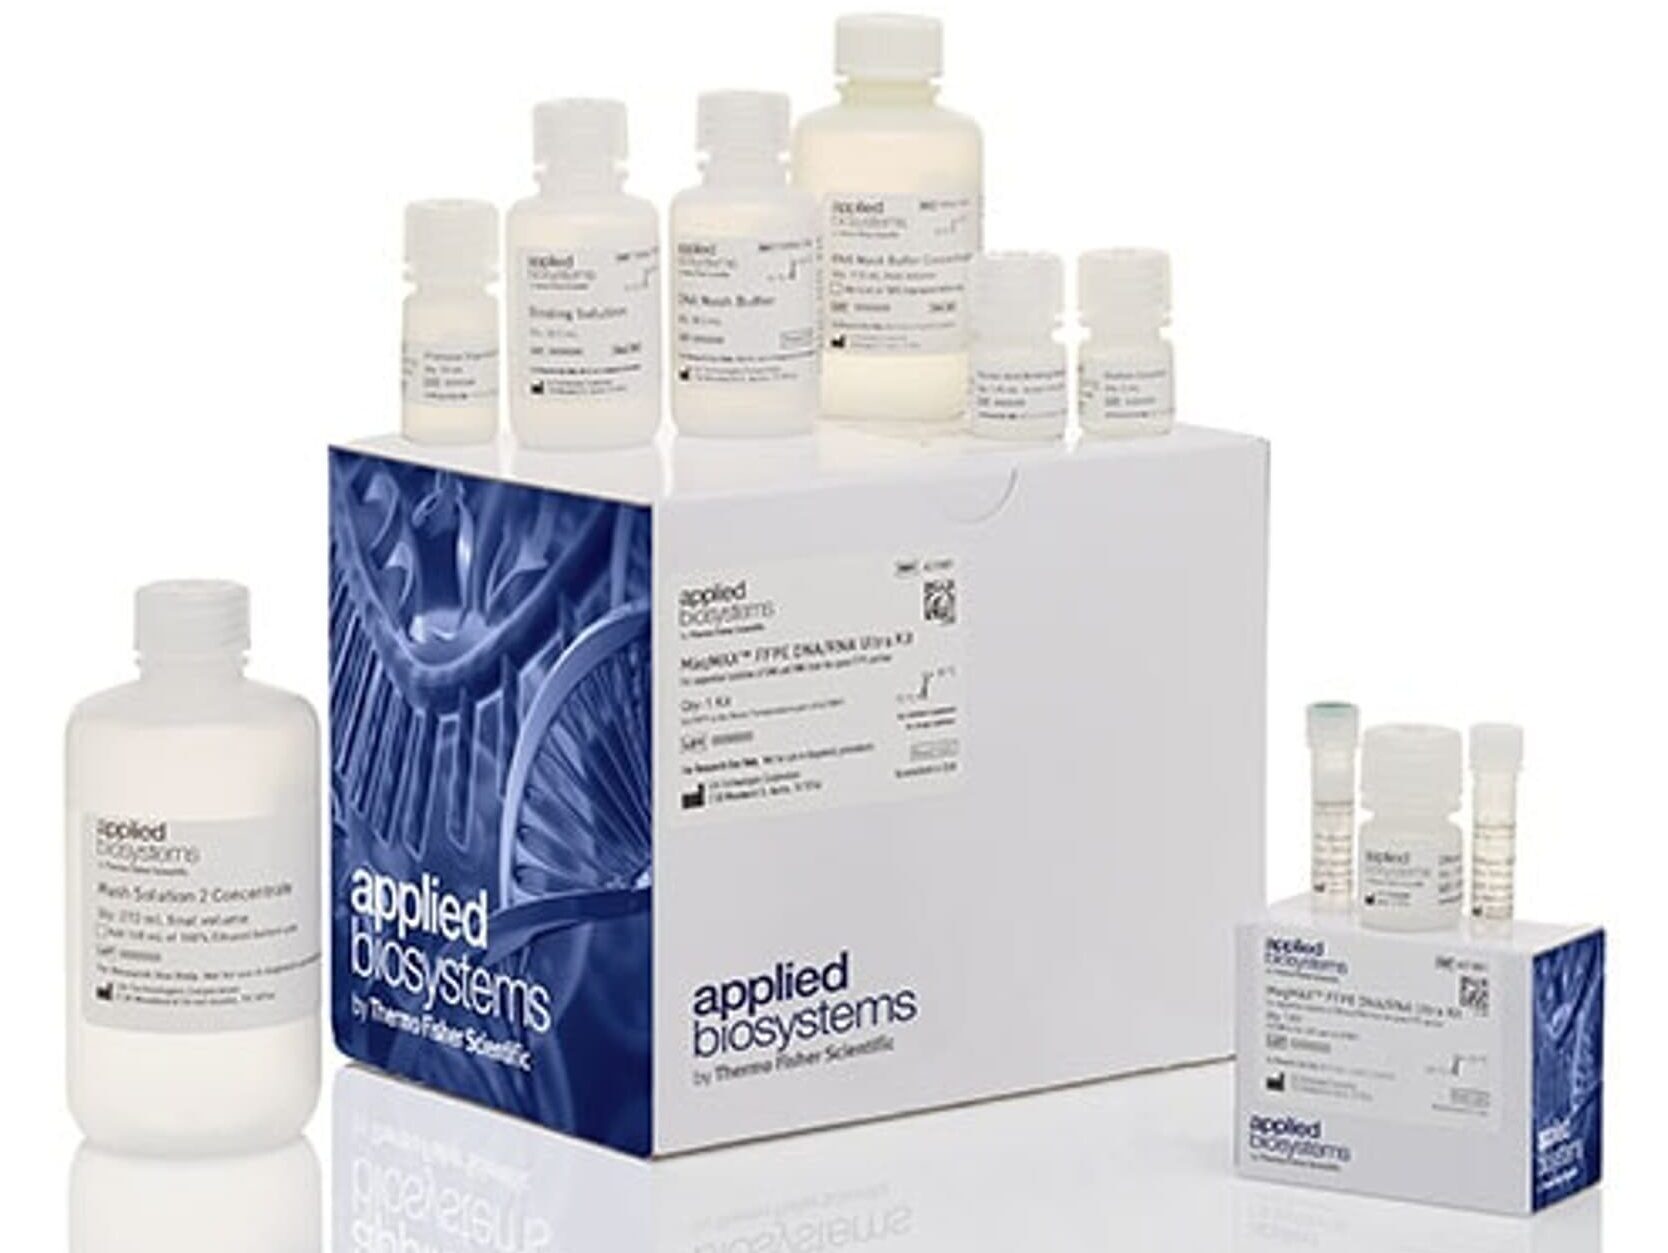 The Applied Biosystems MagMAX mirVana Total RNA Isolation Kit is designed for isolation of total RNA, including small RNAs such as microRNAs, from a wide variety of sample types.